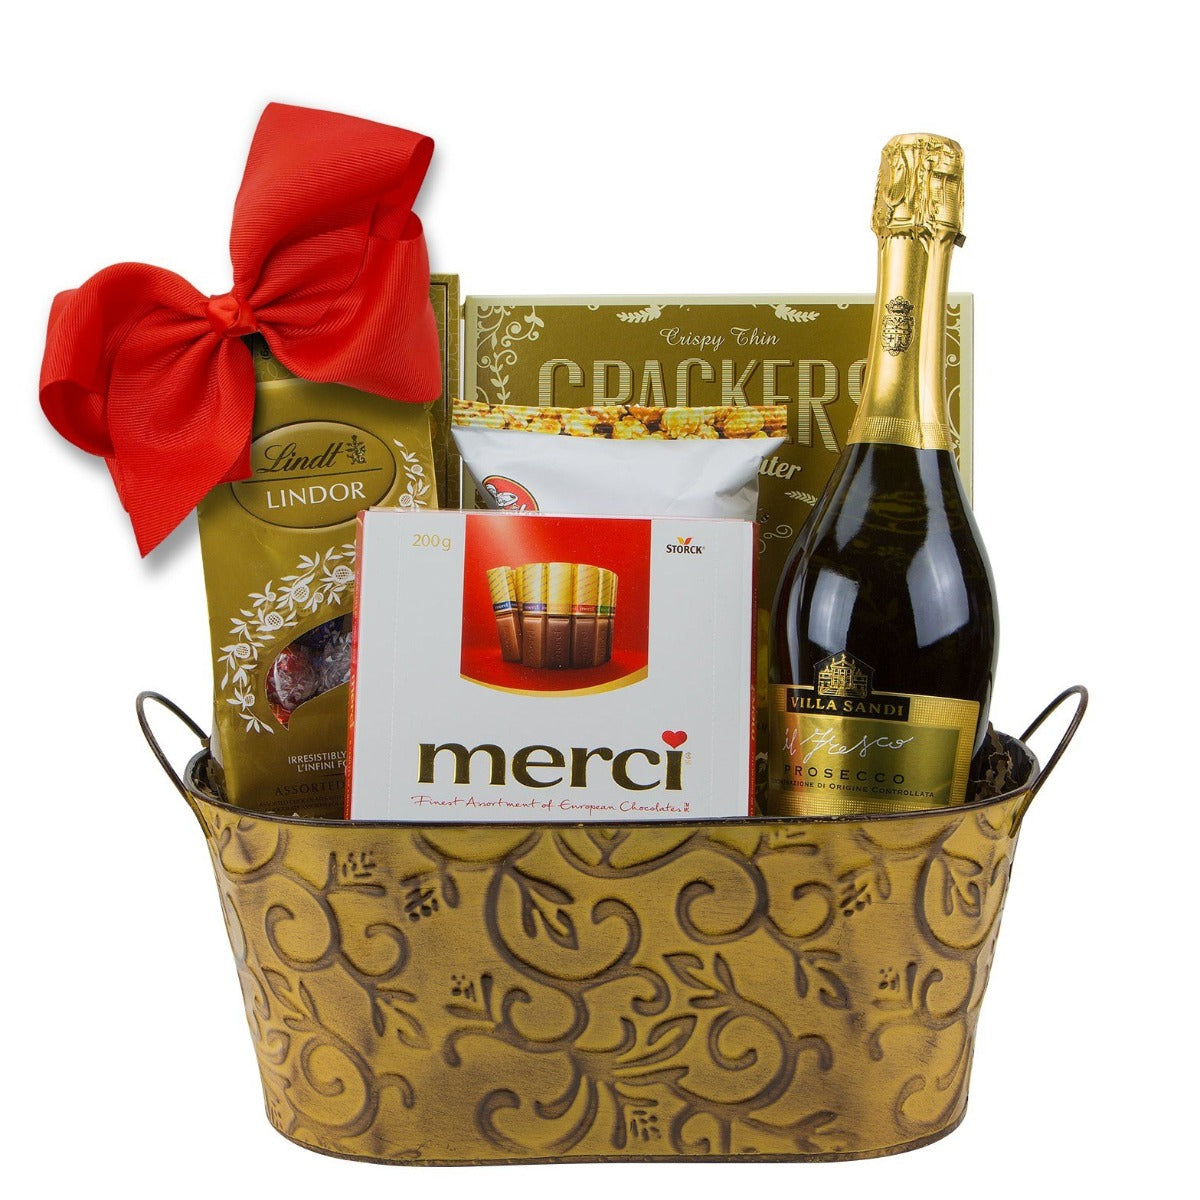 beer gift baskets toronto, fathers day gift baskets toronto, thank you gift baskets toronto, wine basket delivery toronto, custom gift baskets